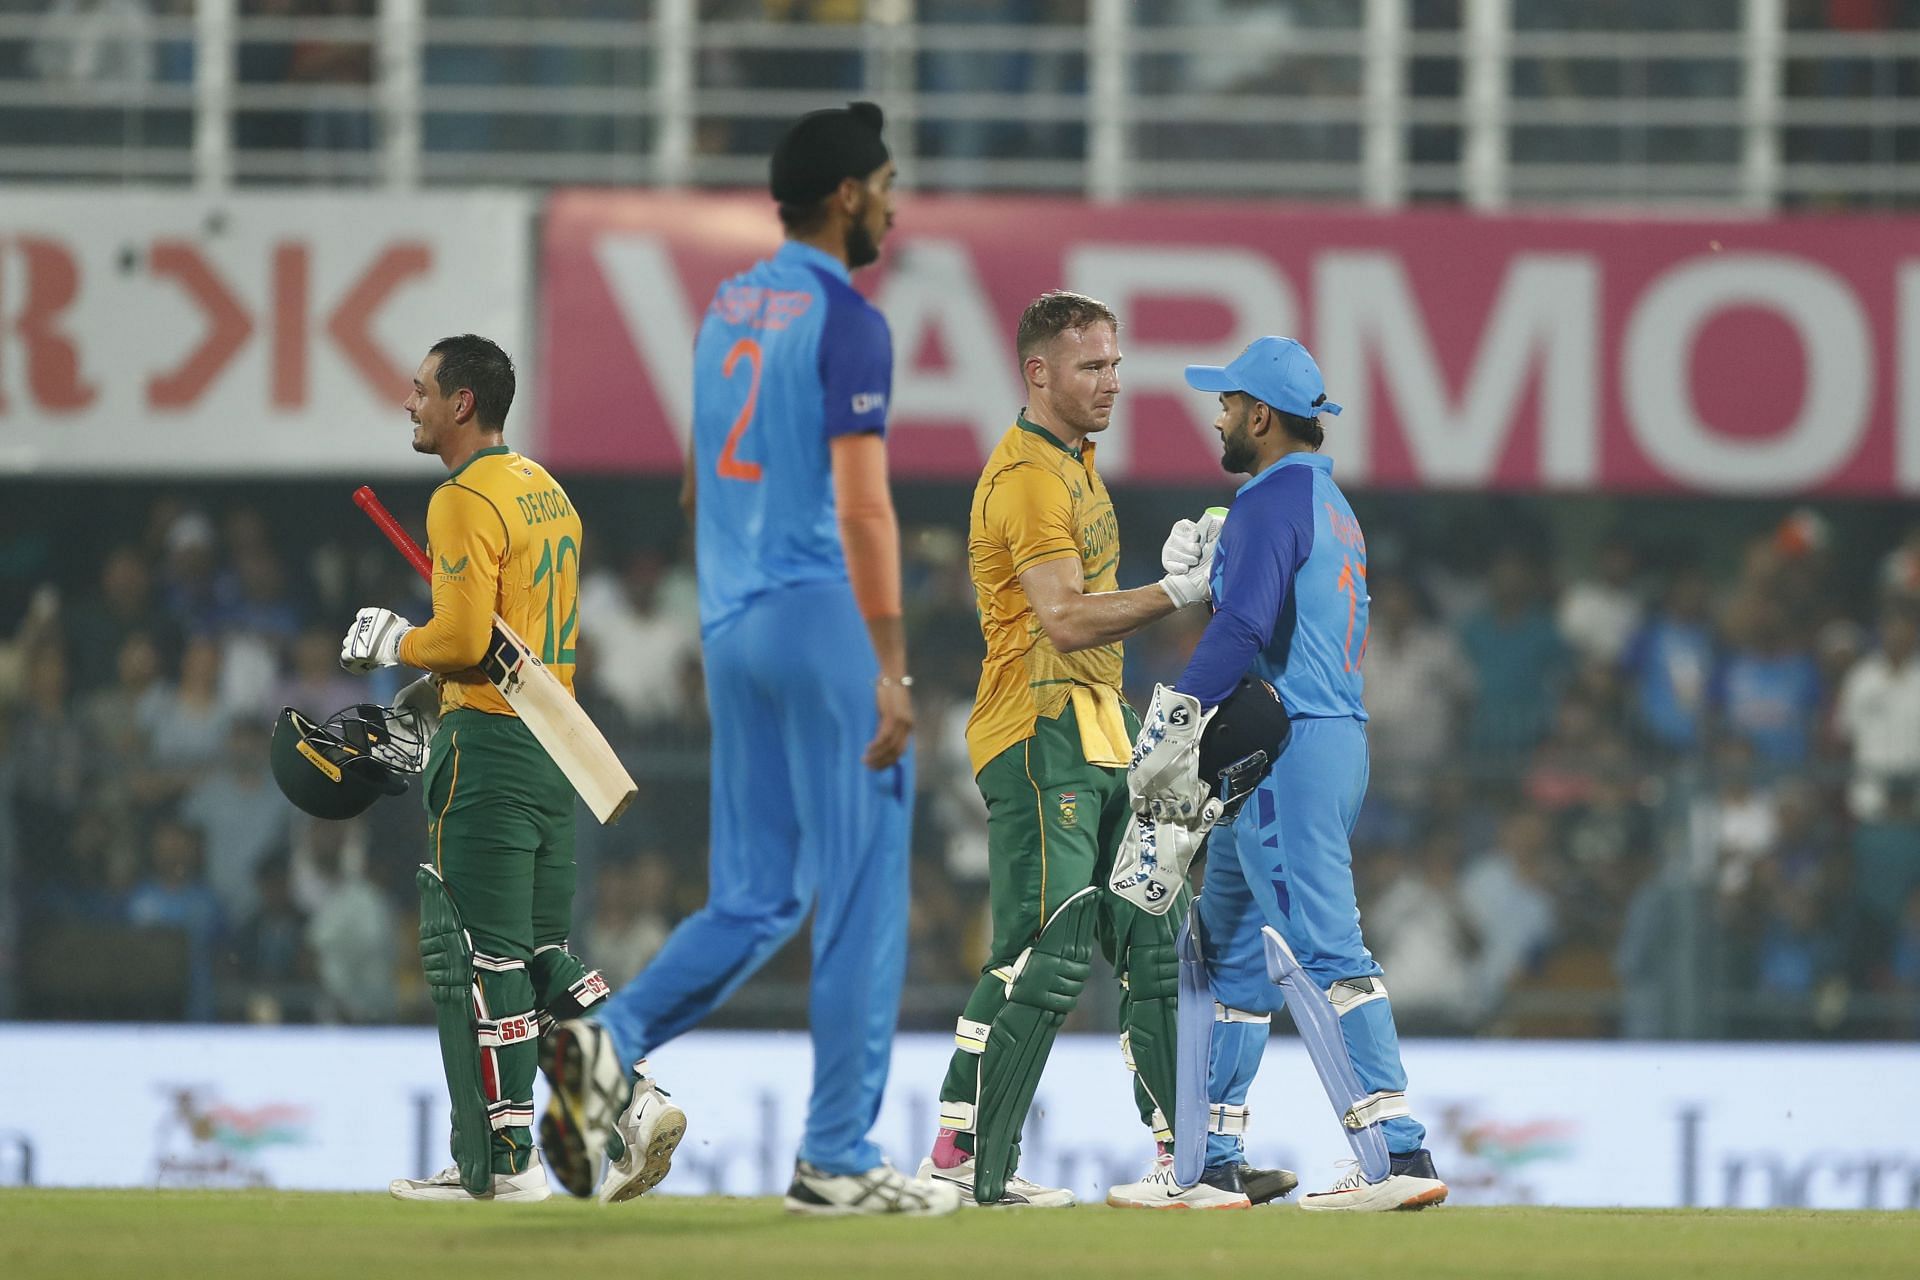 2nd T20 International: India v South Africa